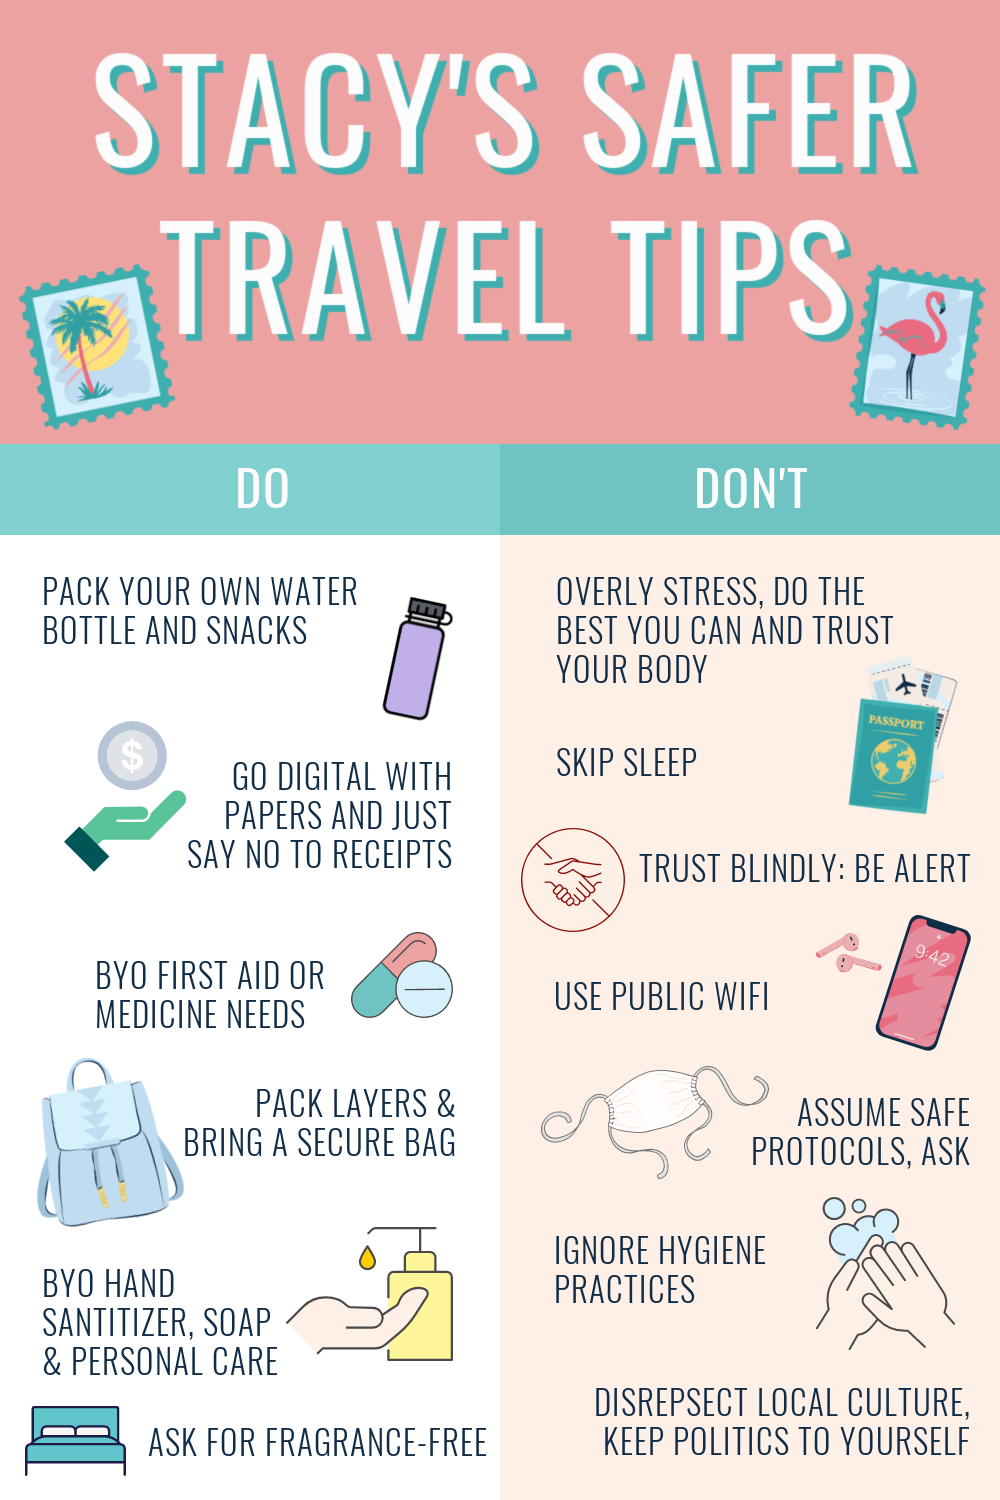 How to find the perfect Travel Partners: Tips & Tricks